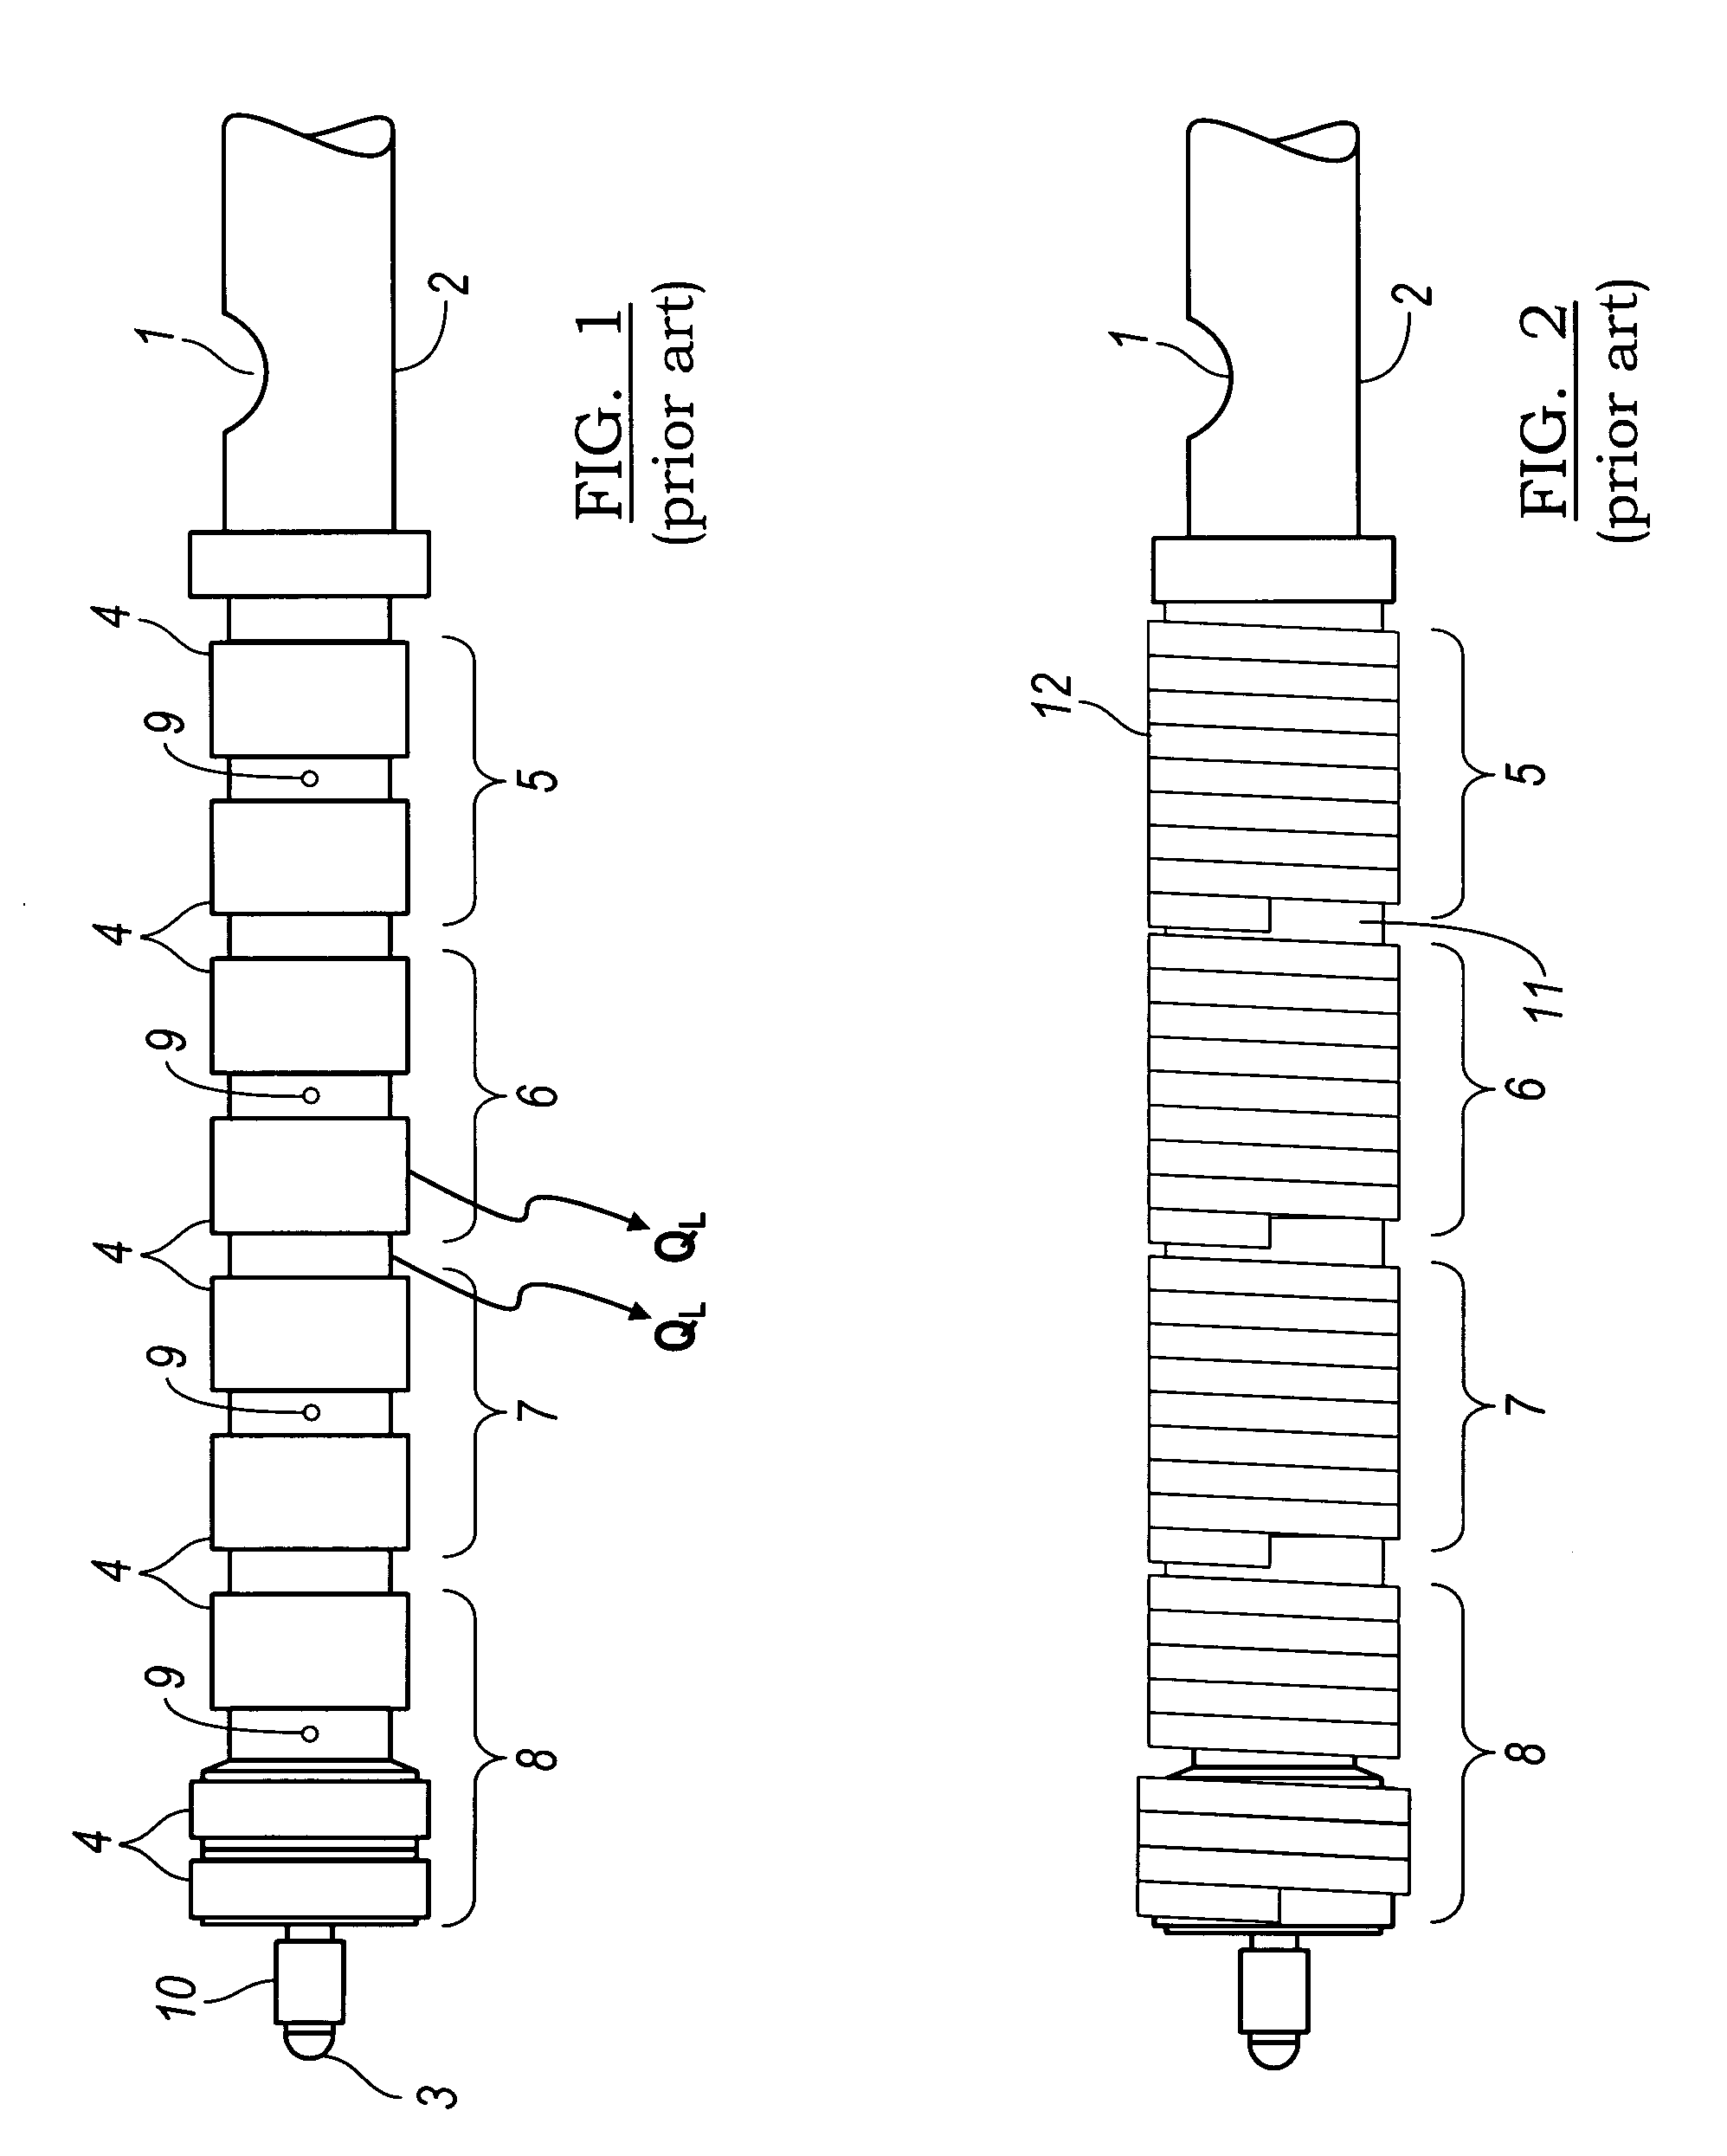 Heating system for plastic processing equipment having a profile gap